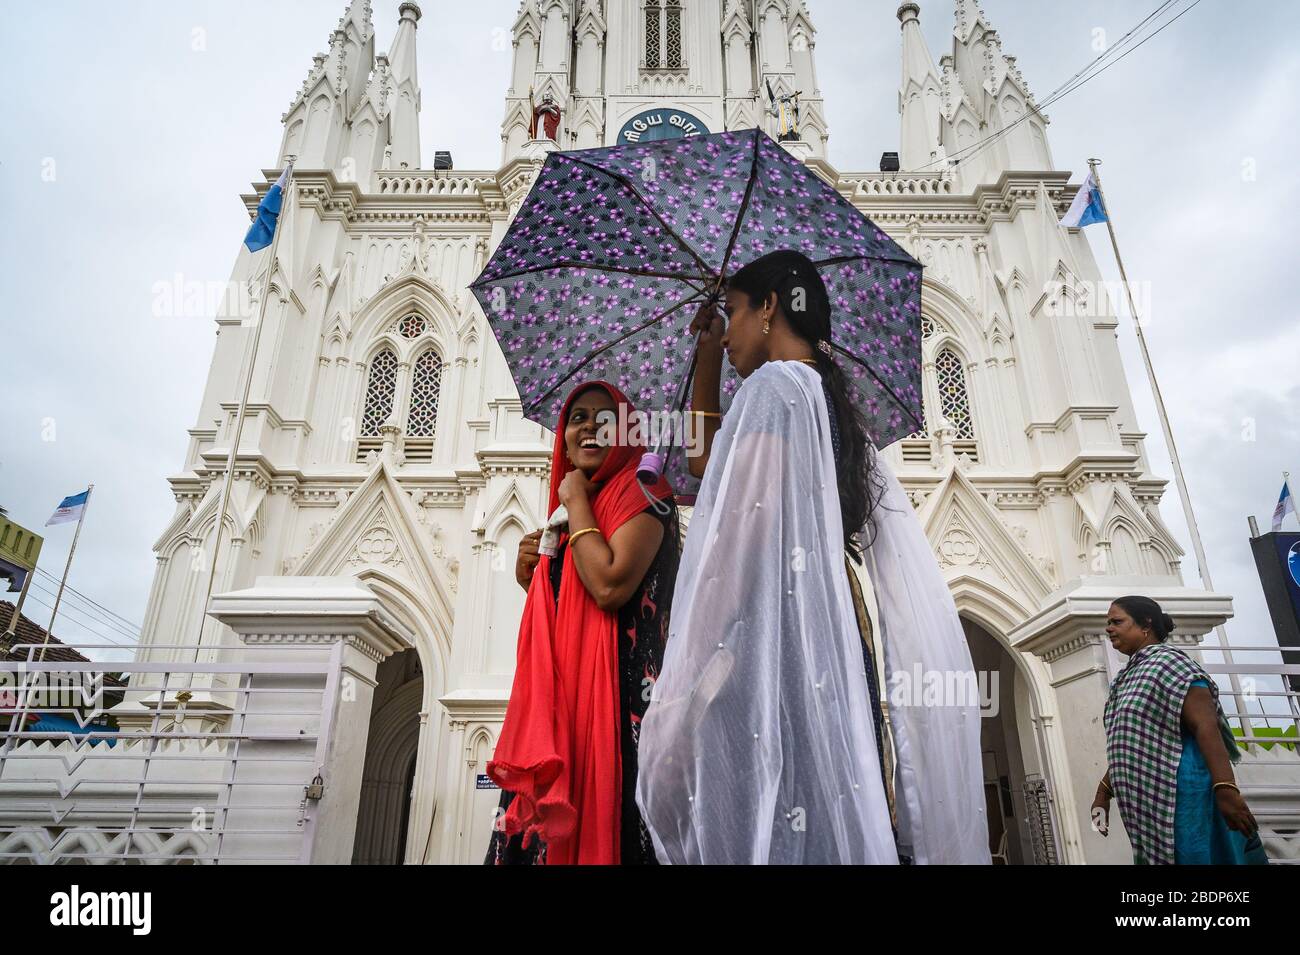 Women strolling by Our Lady of Ransom Church, Kanyakumari, India Stock Photo